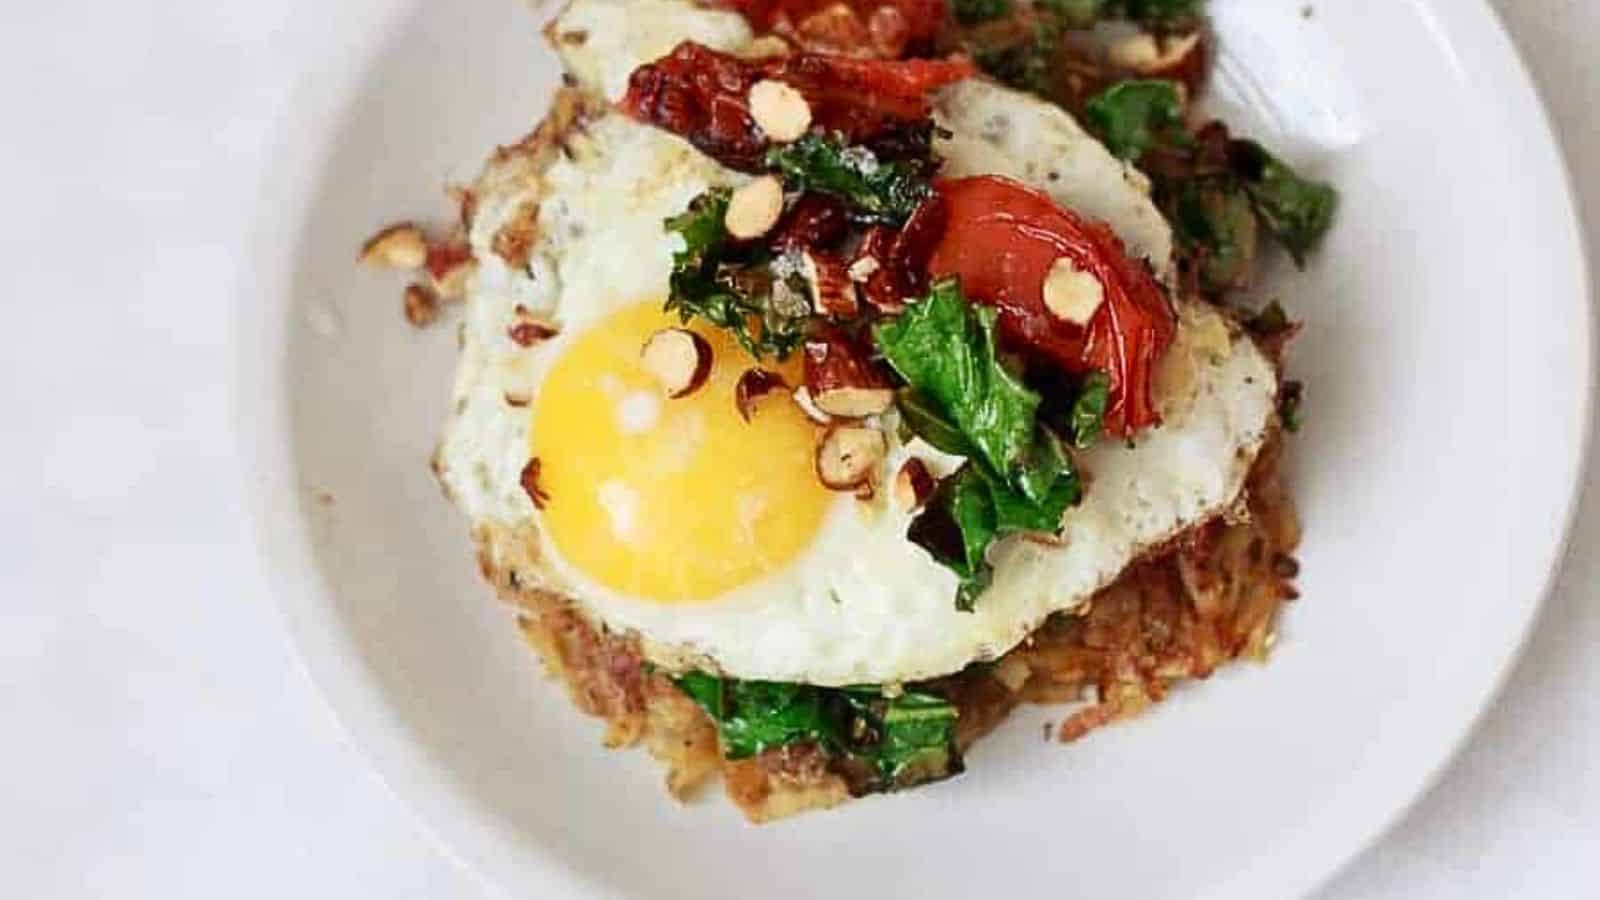 A plate topped with a fried egg and greens.